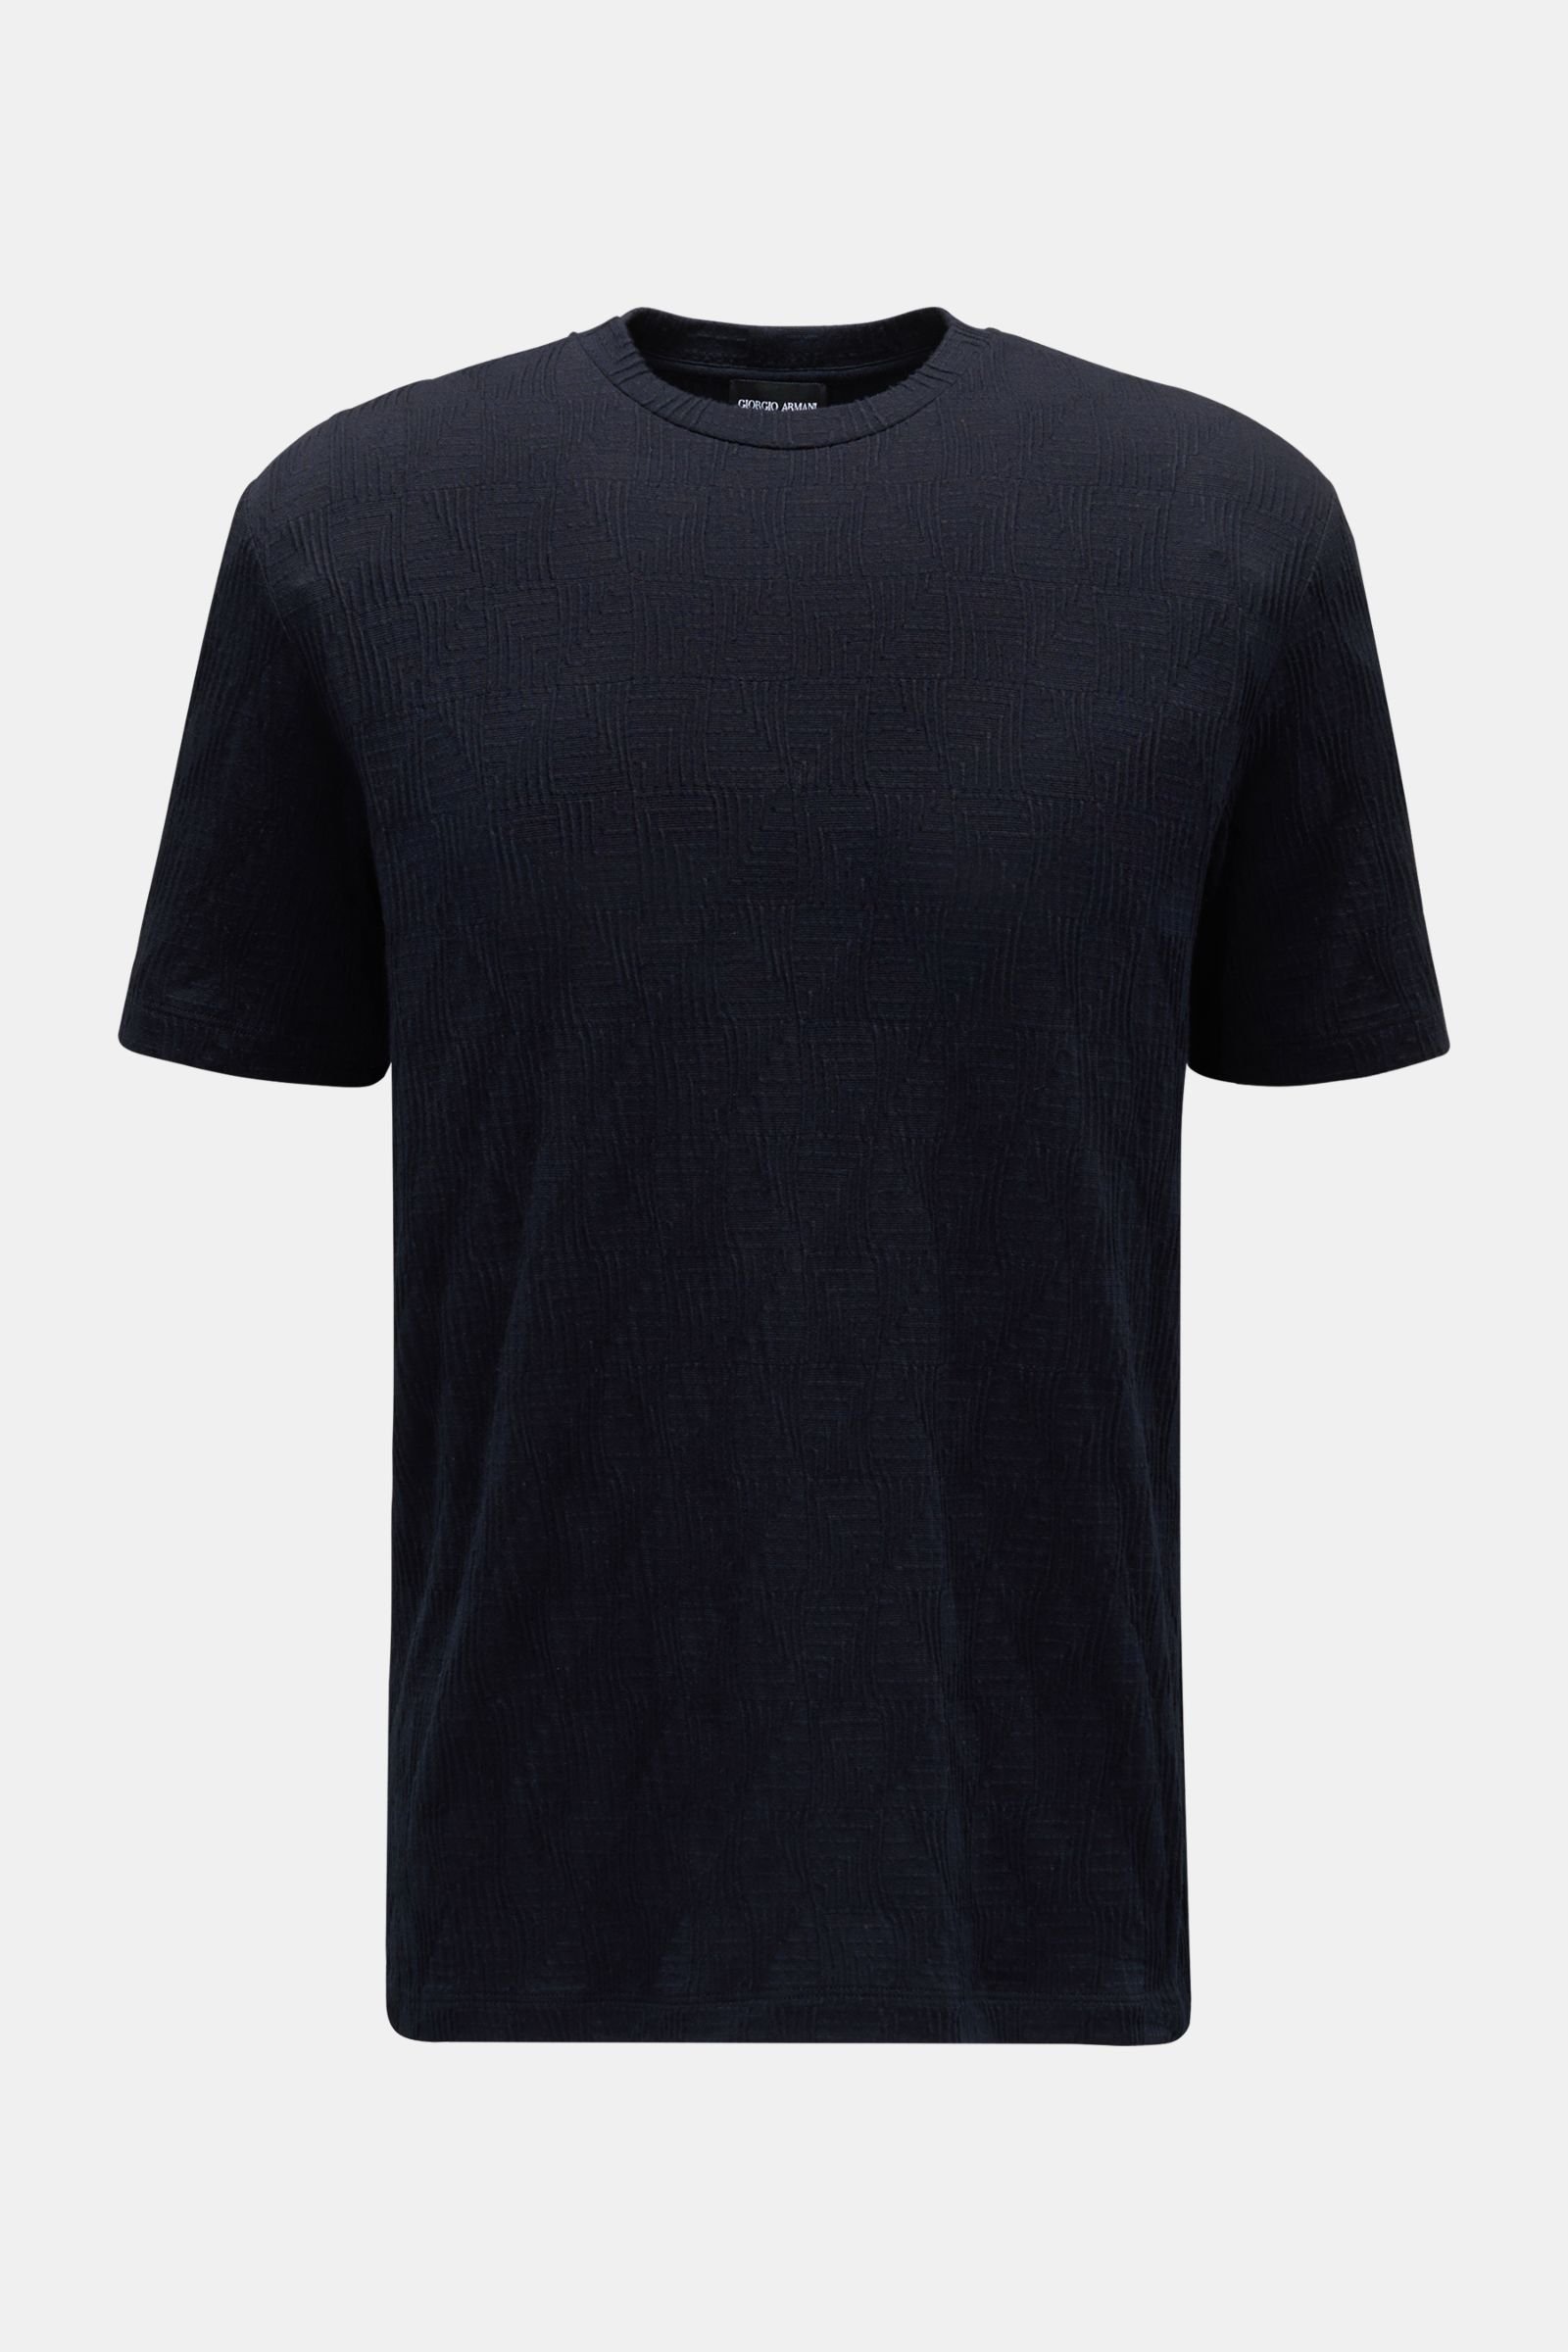 Crew neck T-shirt navy patterned